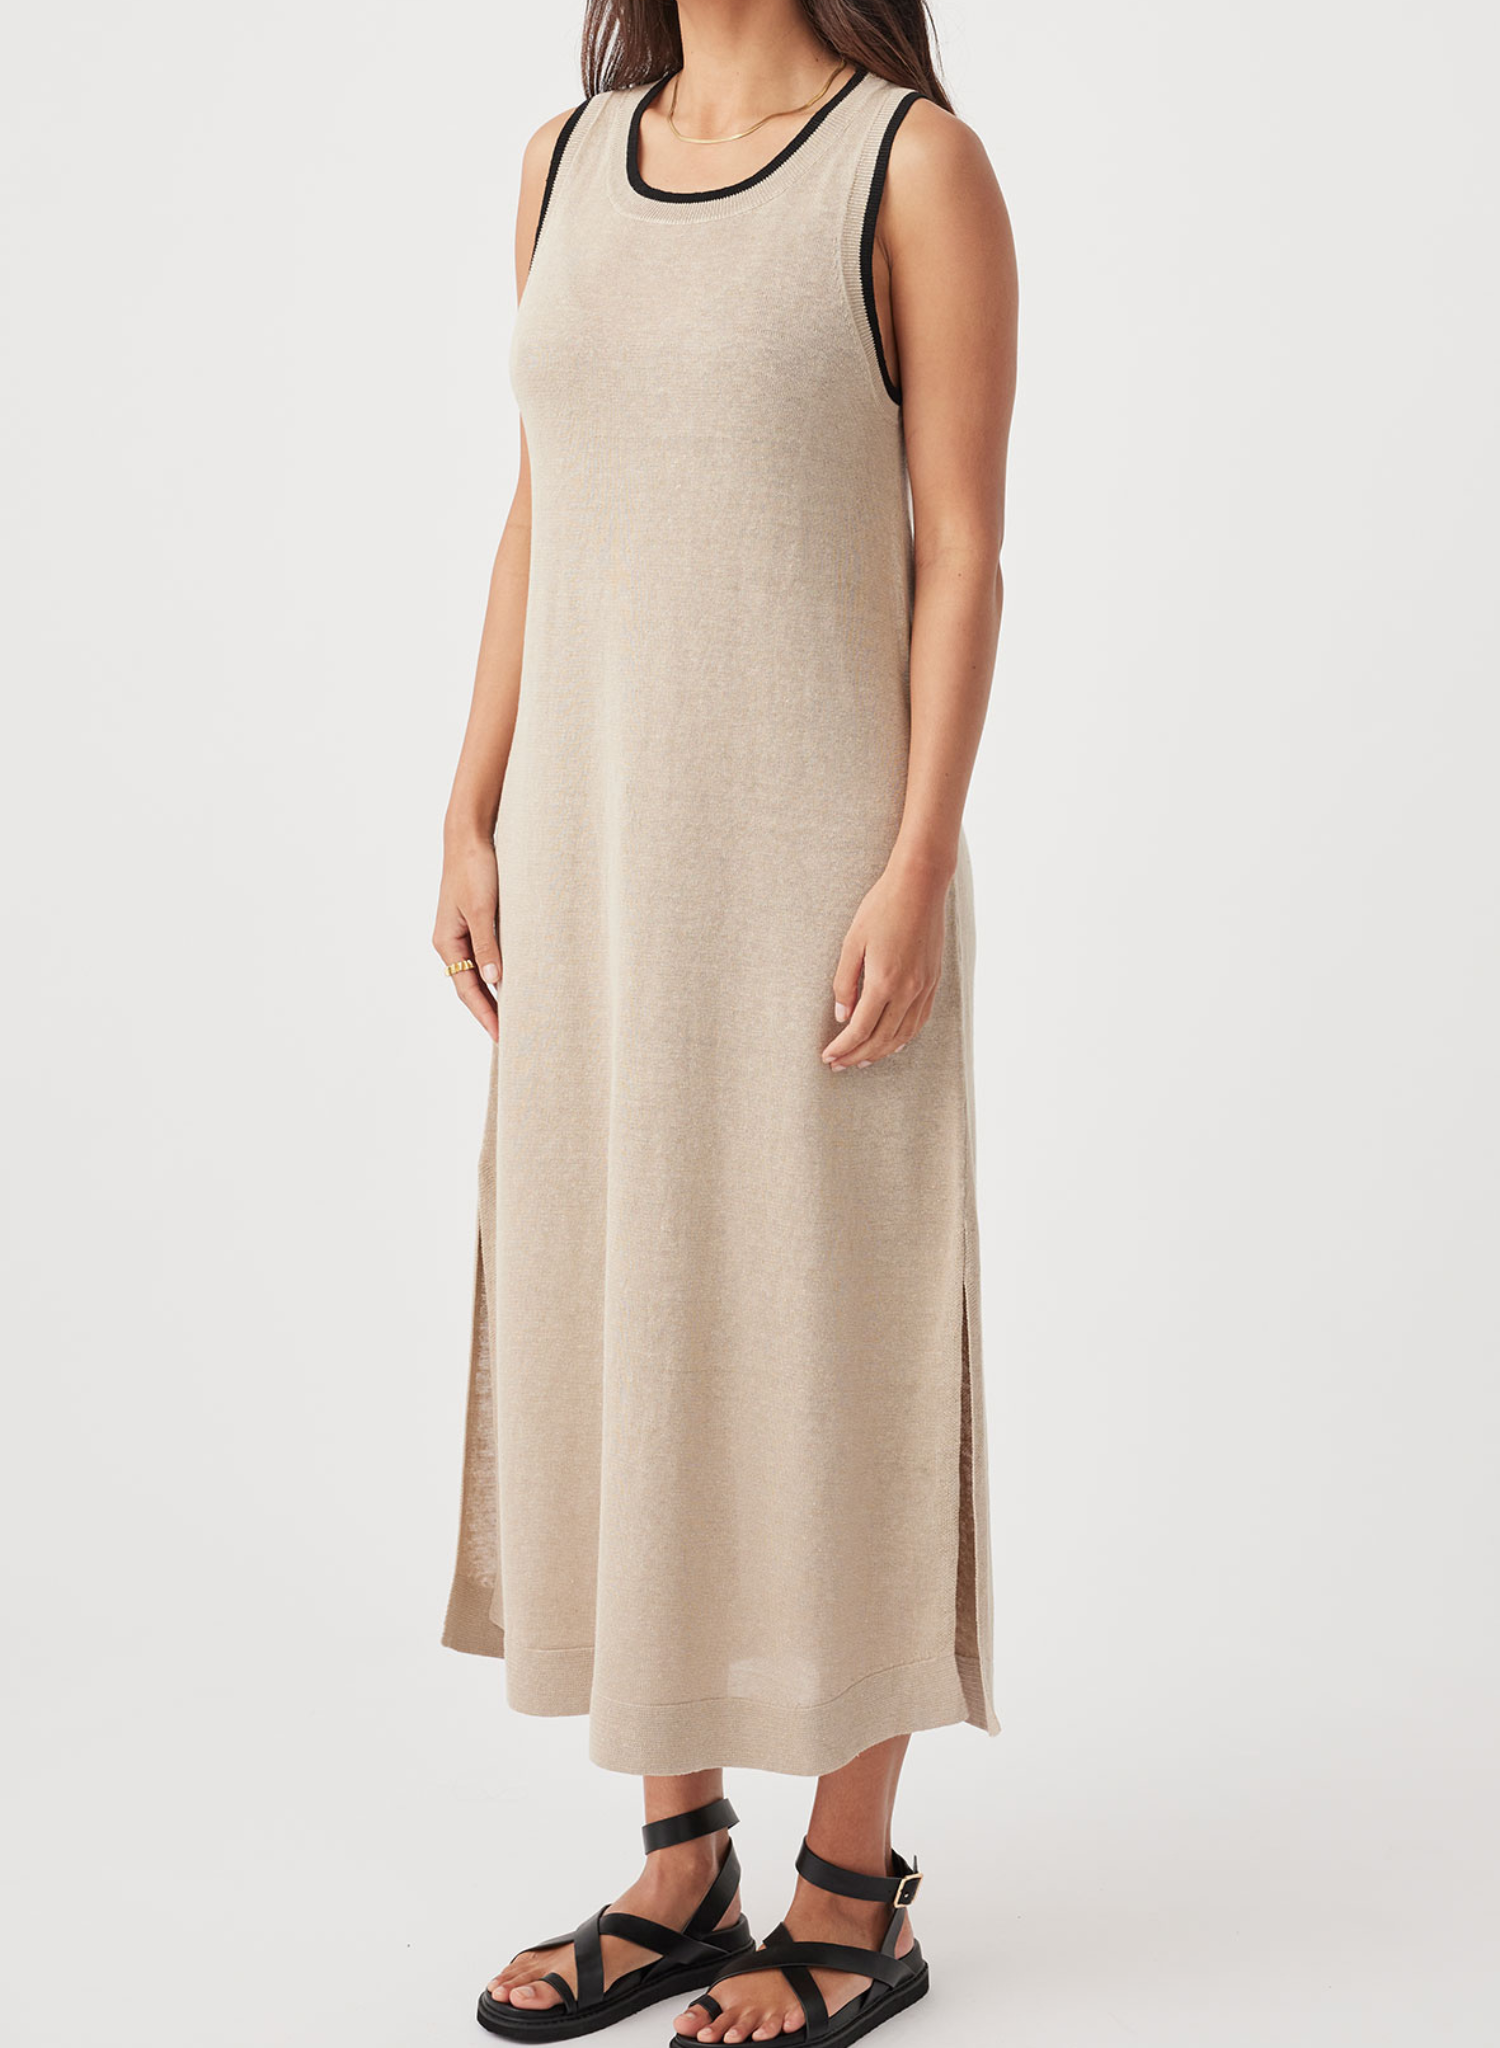 Brie Long Dress in Taupe